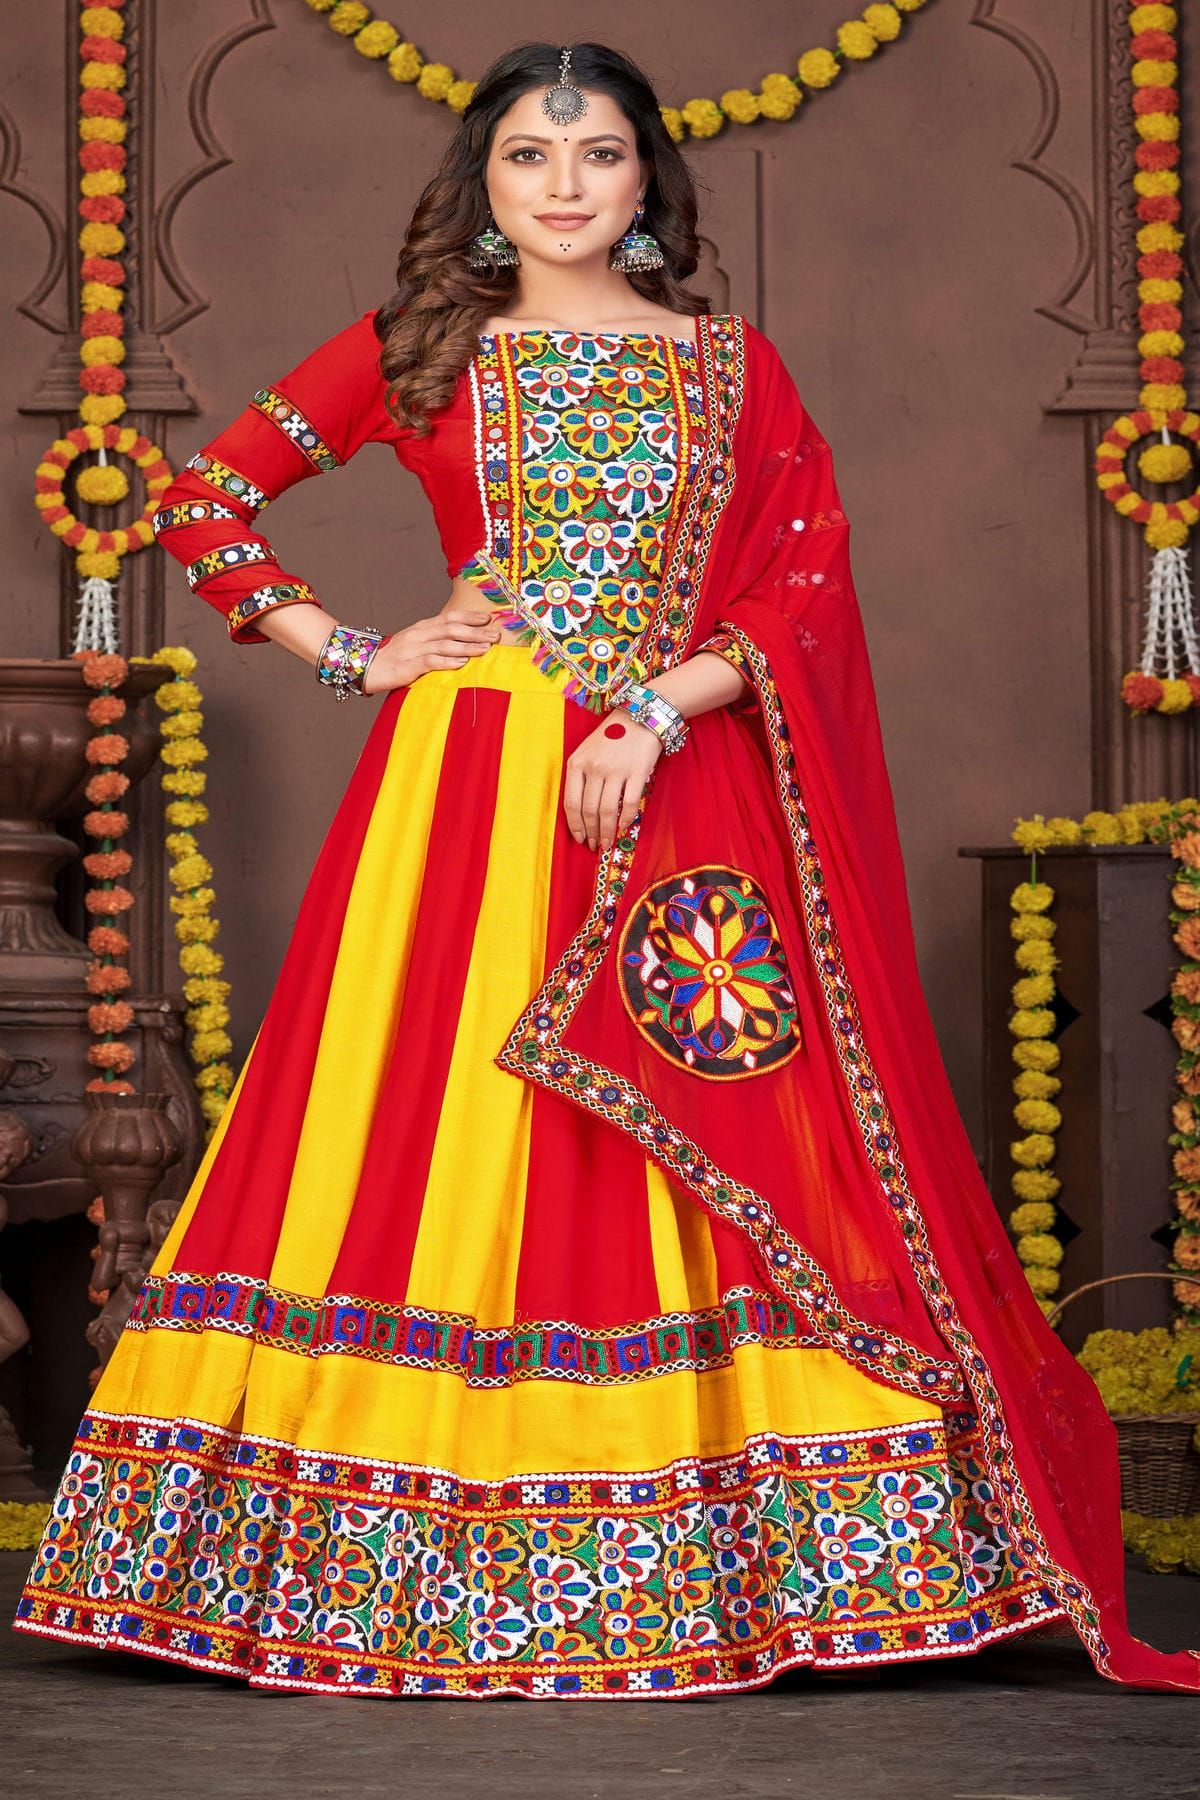 Ninecolours.com - Yellow Colour Banglori Silk Lehenga Choli Comes With  Matching Blouse and Dupatta.This Lehenga Choli Is Crafted With Zari  Work,Embroidery,Diamond Work. This Lehenga Choli Comes As a Semi Stitched  and Blouse